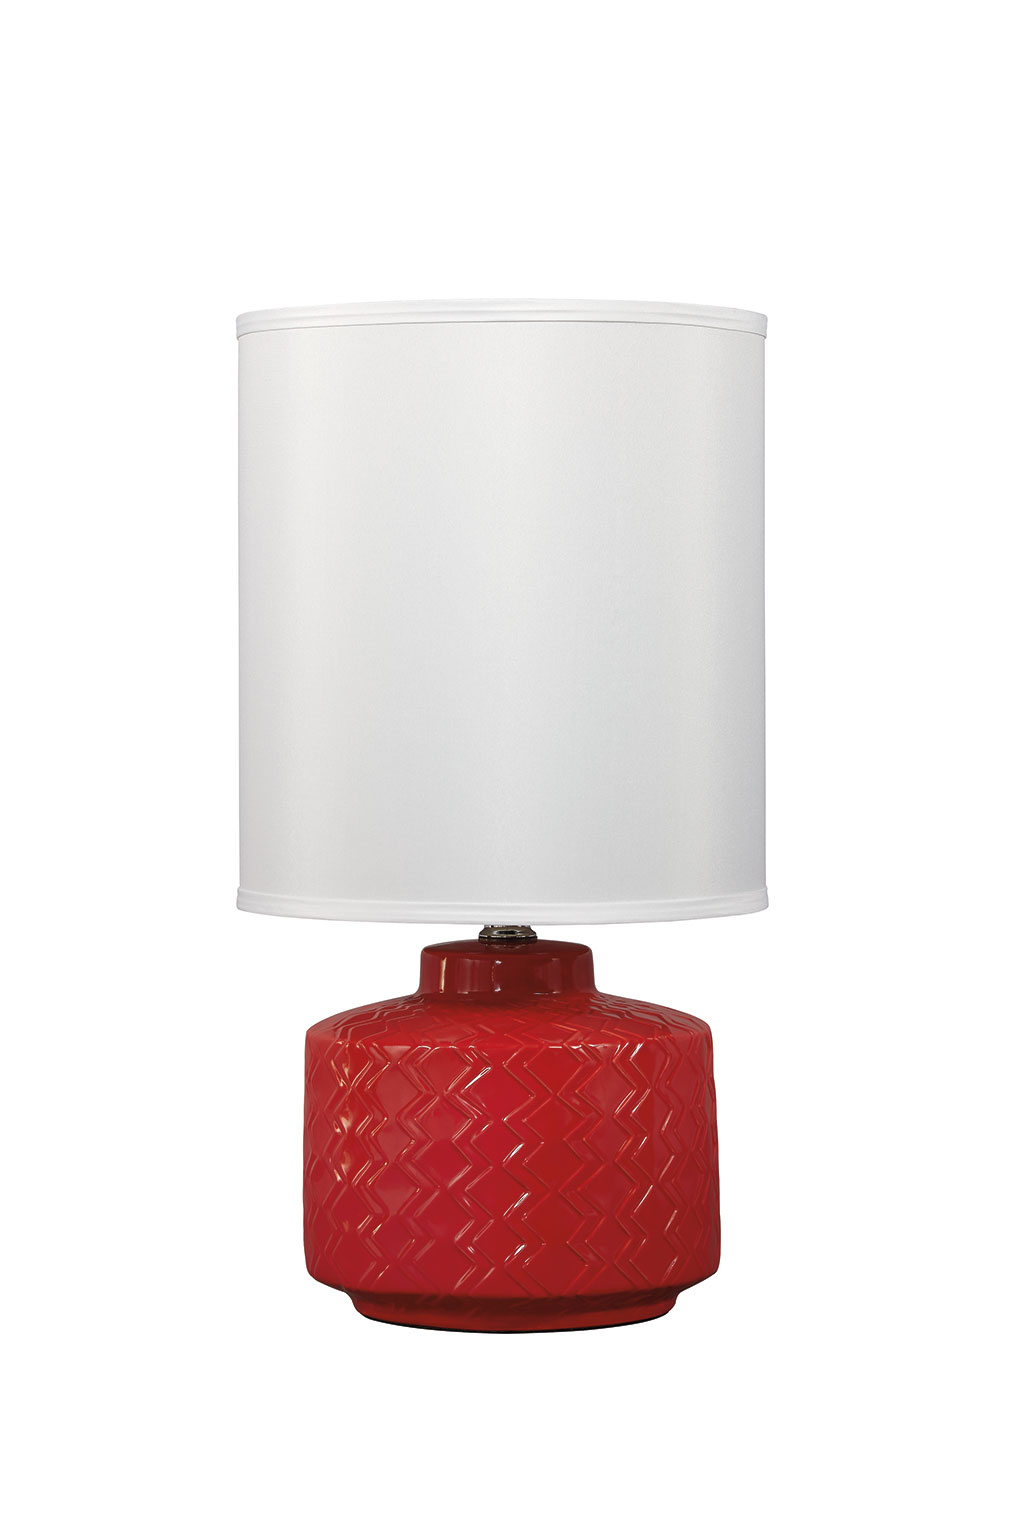 L800034 Table Lamp - Red